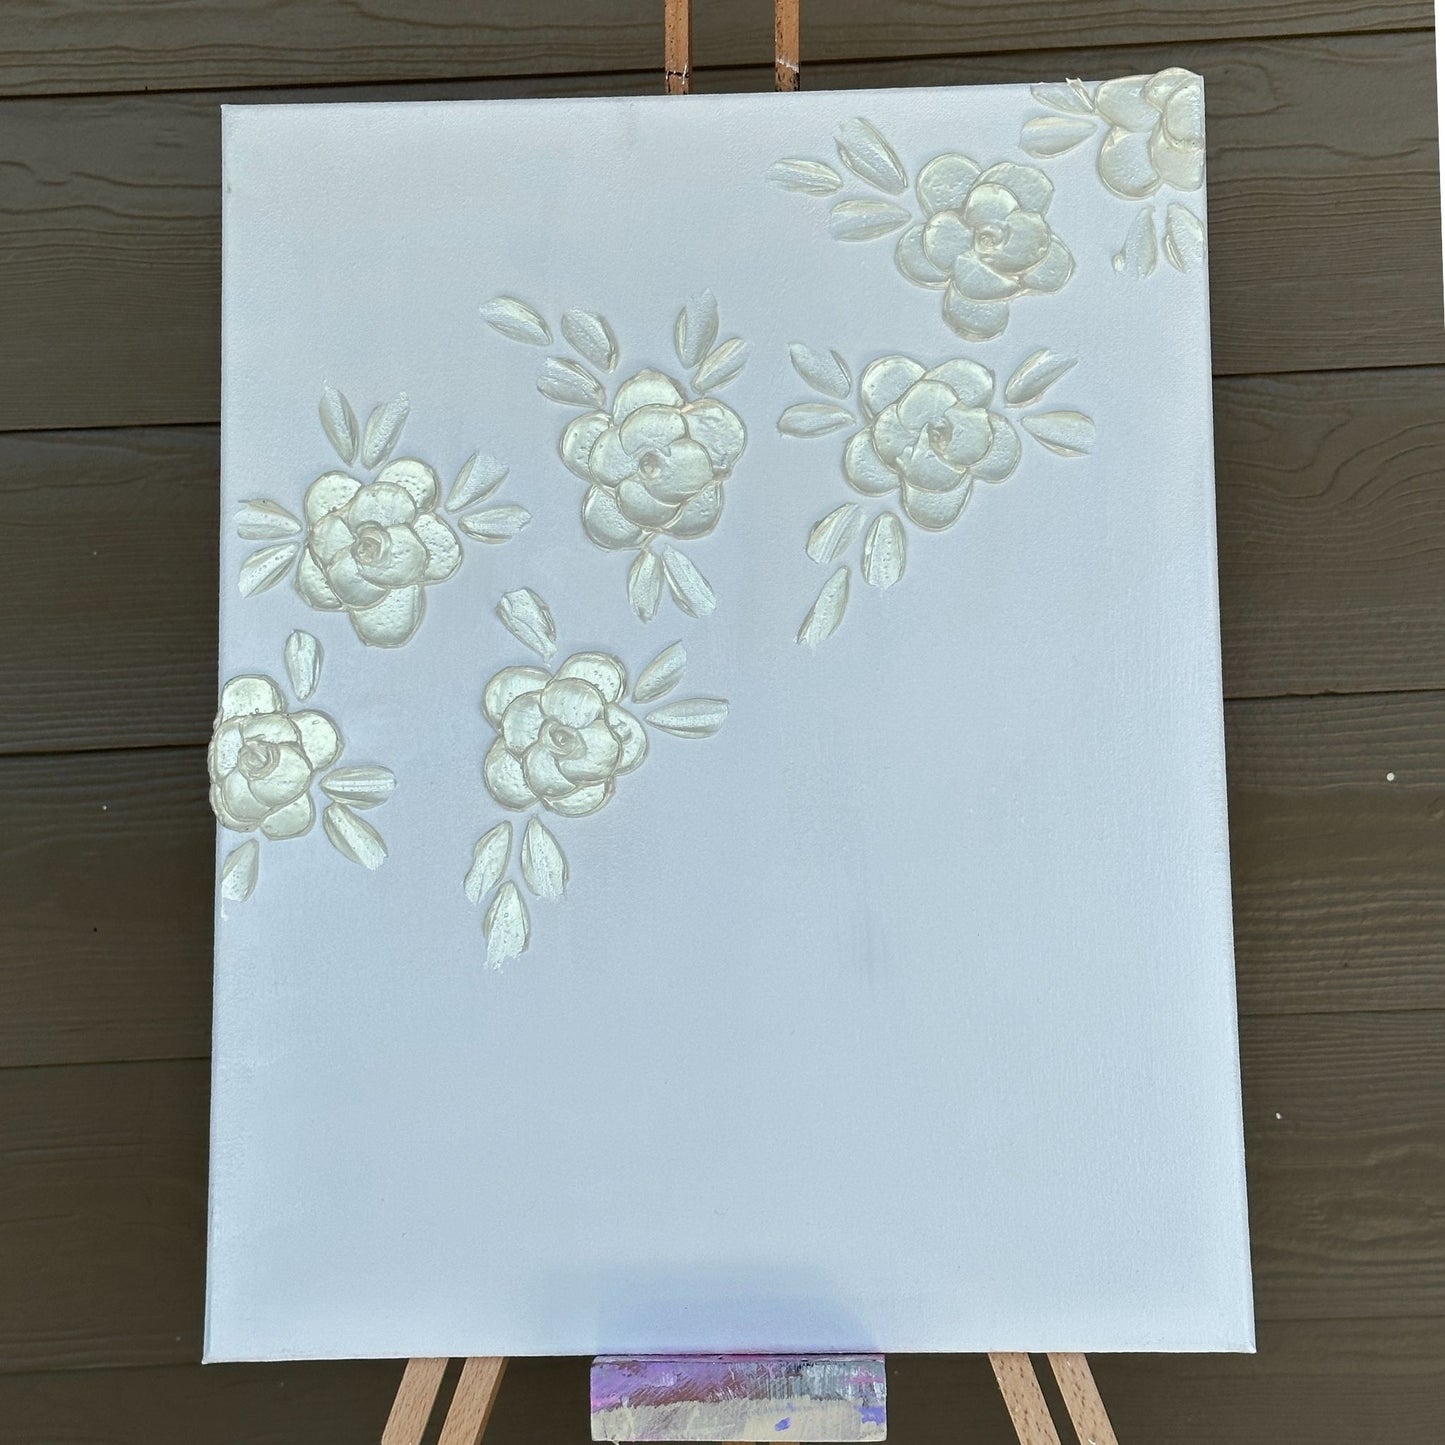 3D Texture White Pearl Roses on White Canvas 16"x20"